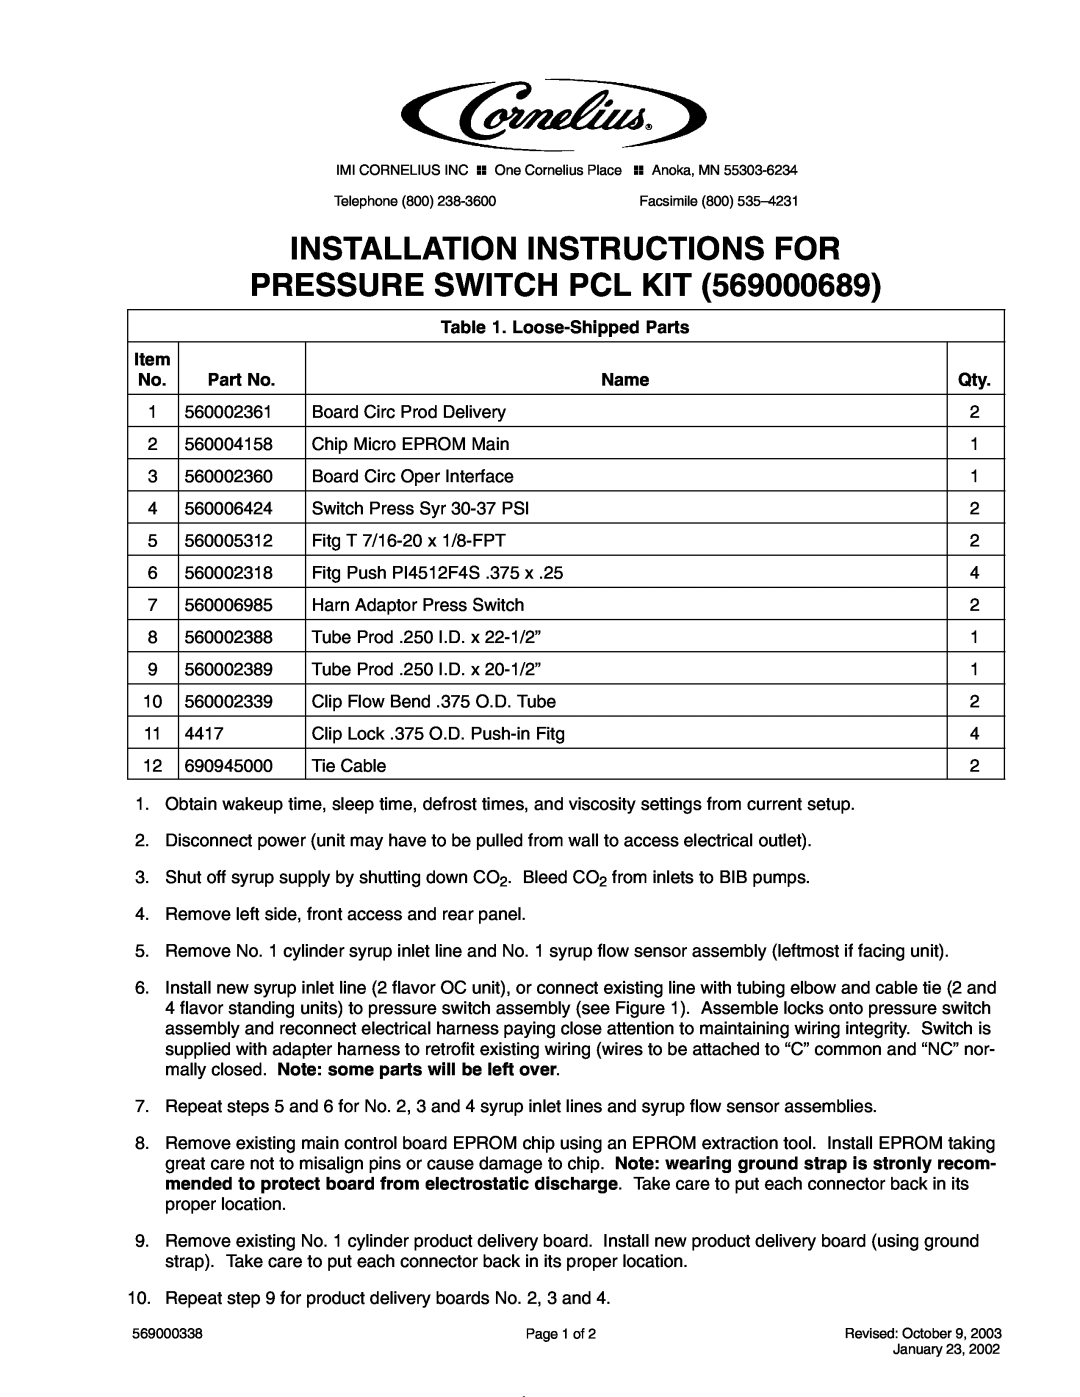 Cornelius 569000689 installation instructions Loose-Shipped Parts, Name, Pressure Switch Pcl Kit 